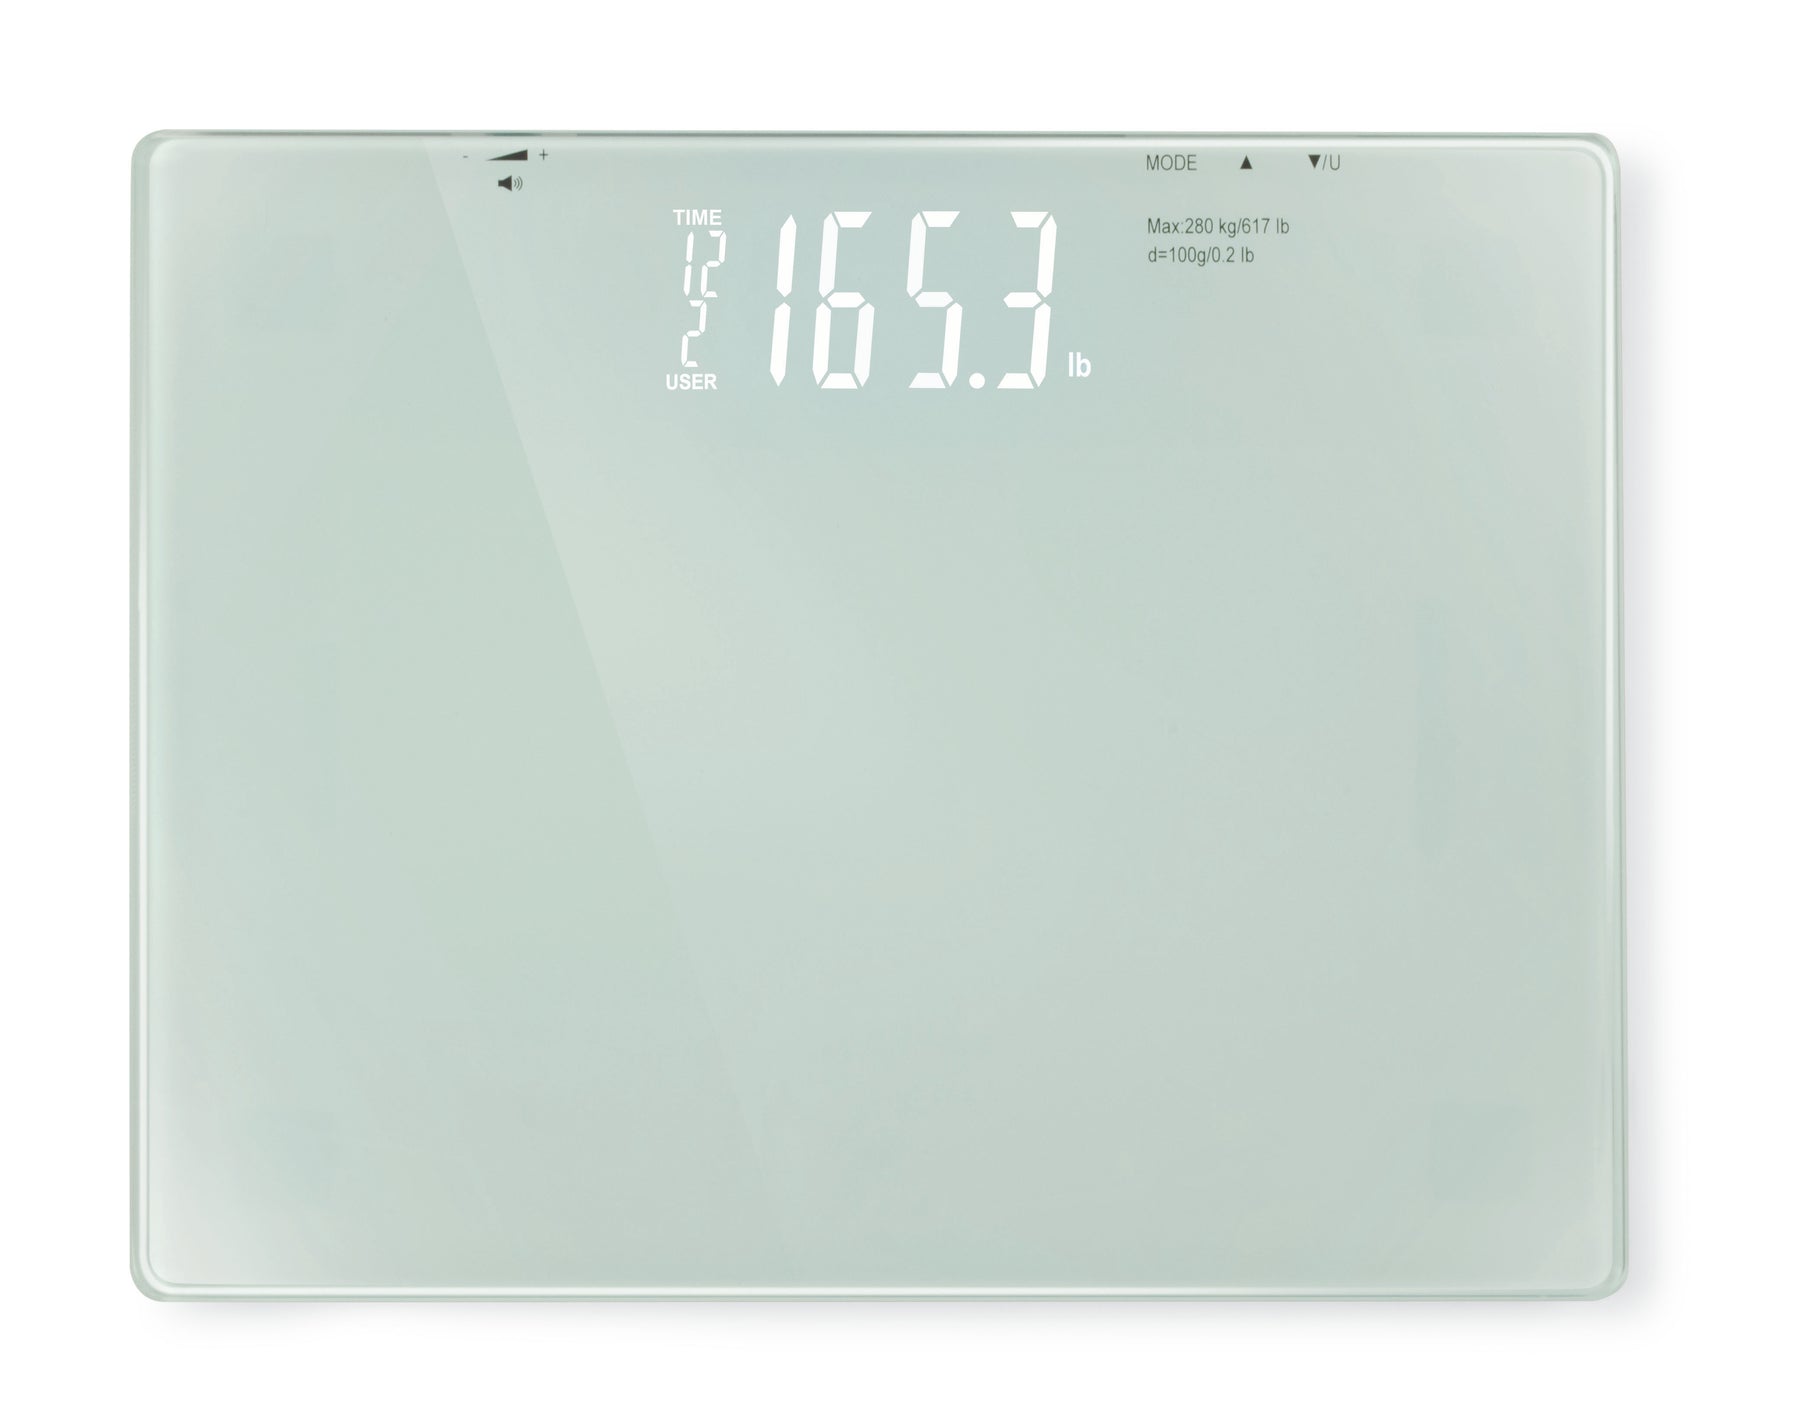 Deluxe Talking Scale – Ideaworks-brand